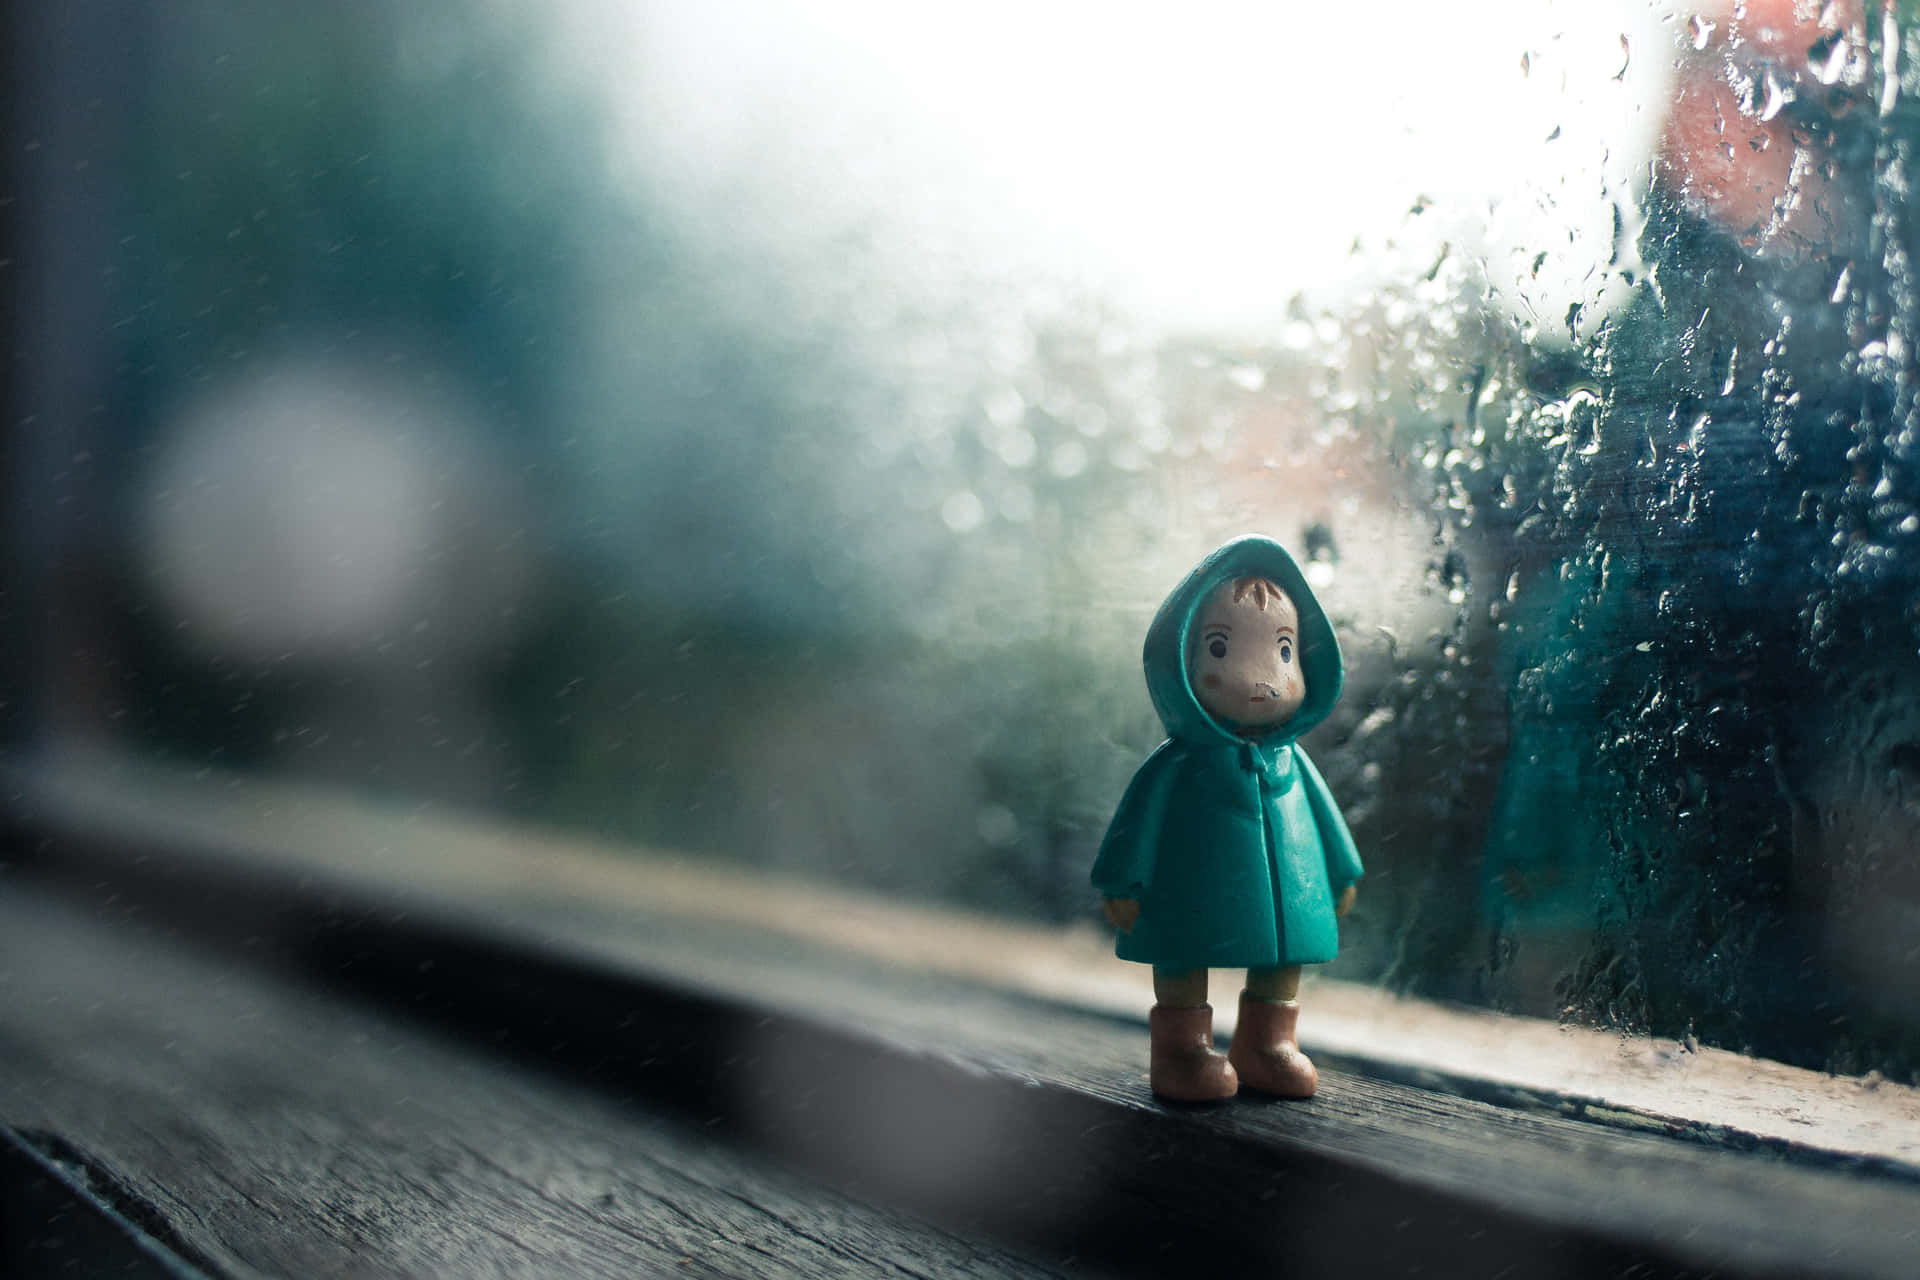 Chibi Toy By The Window During Rainy Day Picture